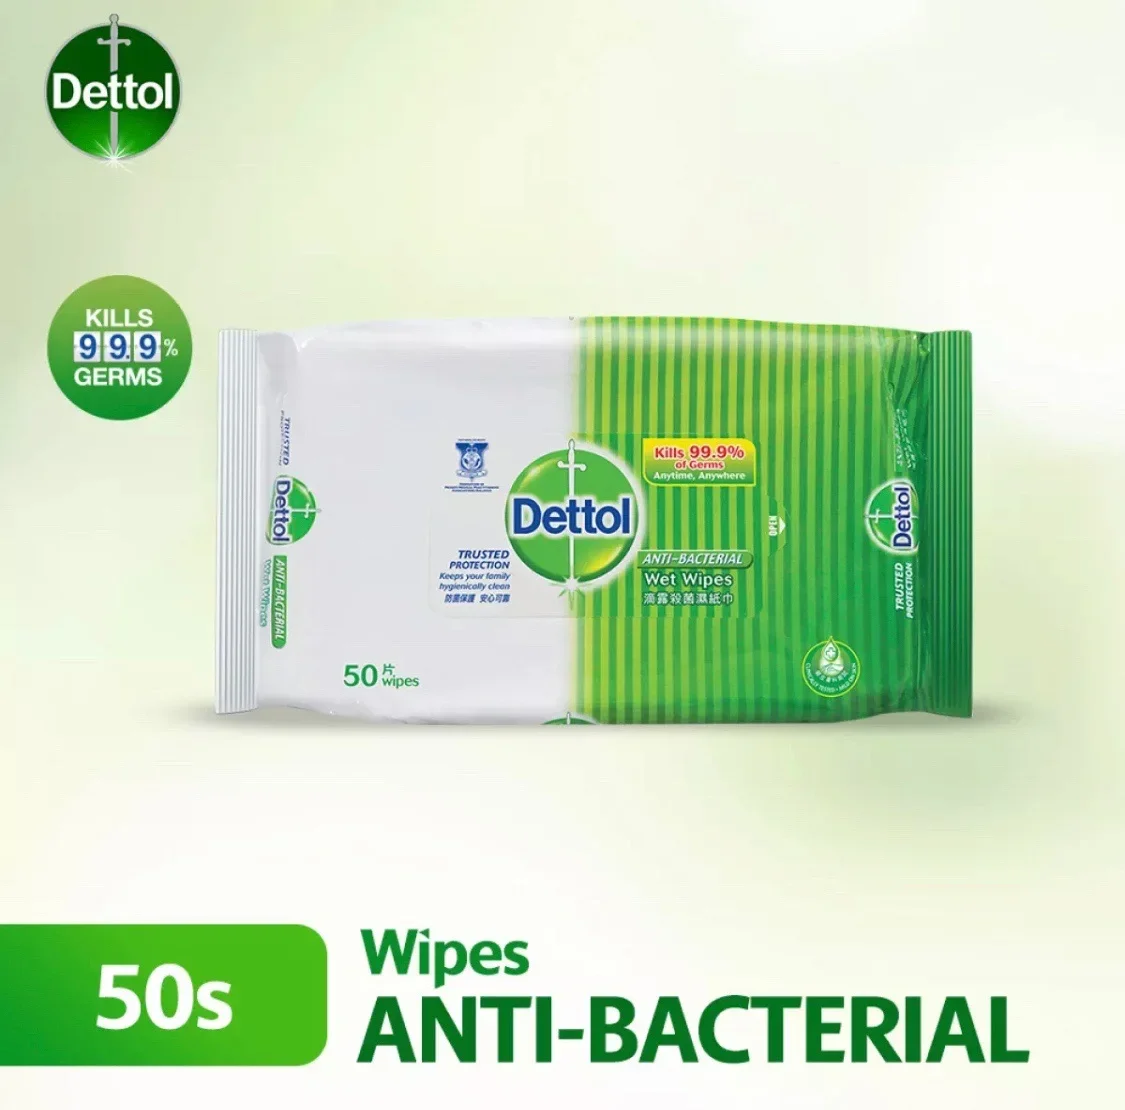 Dettol Anti-Bacterial Wet Wipes 50 Wipes